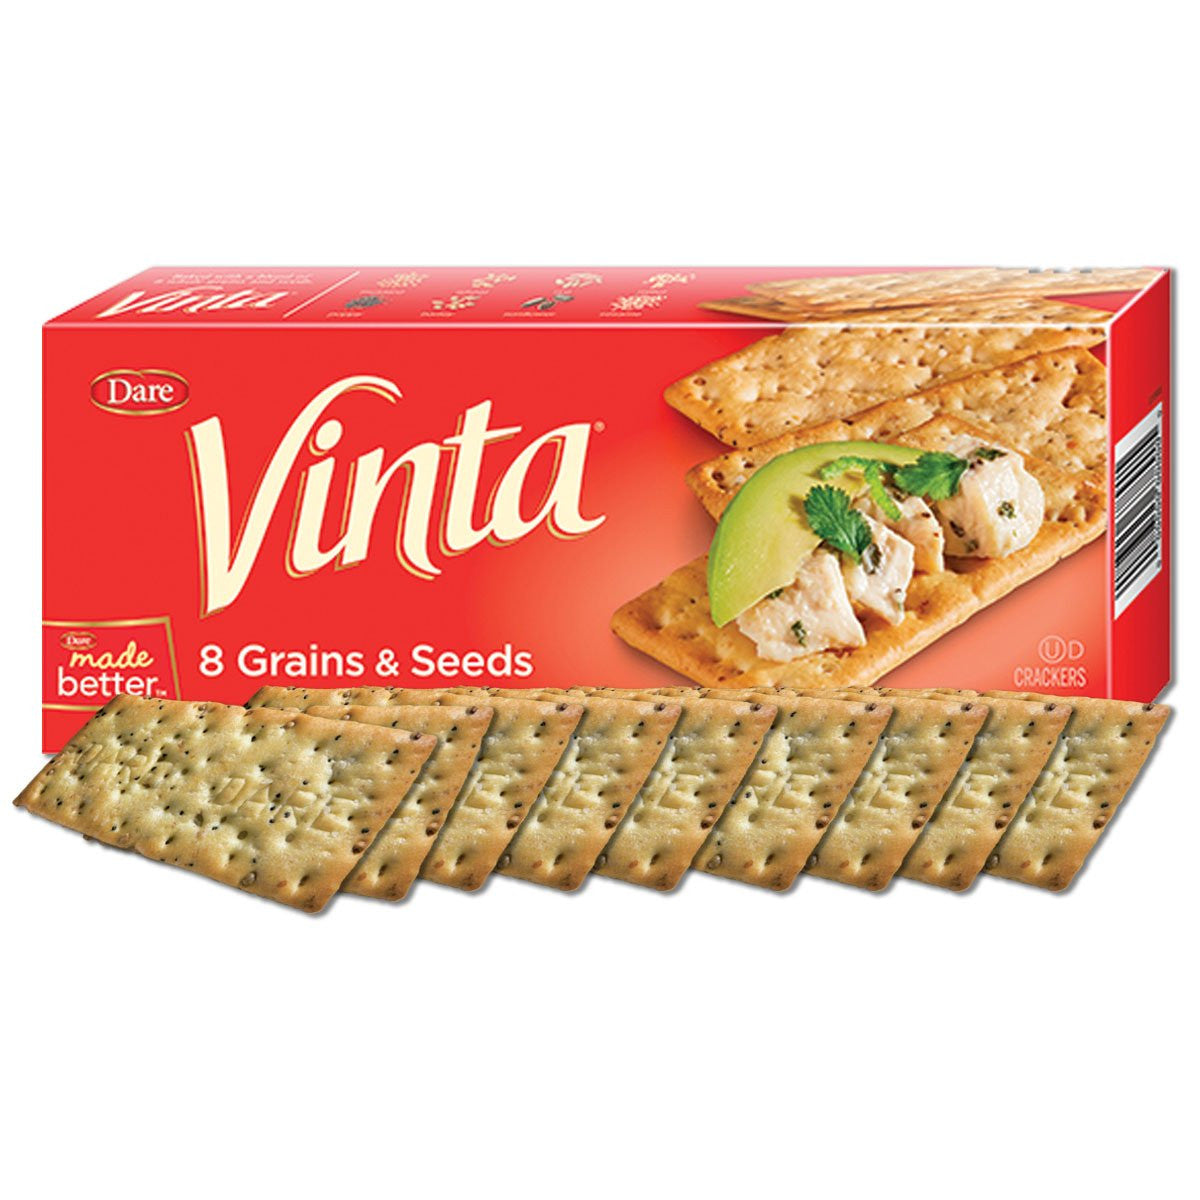 Vinta Crackers, Original Delicious Bold Taste of 8 Grains and Seeds No Artificial Flavors, No Cholesterol, Peanut Free - Delicious Plain or Topped, 8.8-ounce. (Pack of 12 )